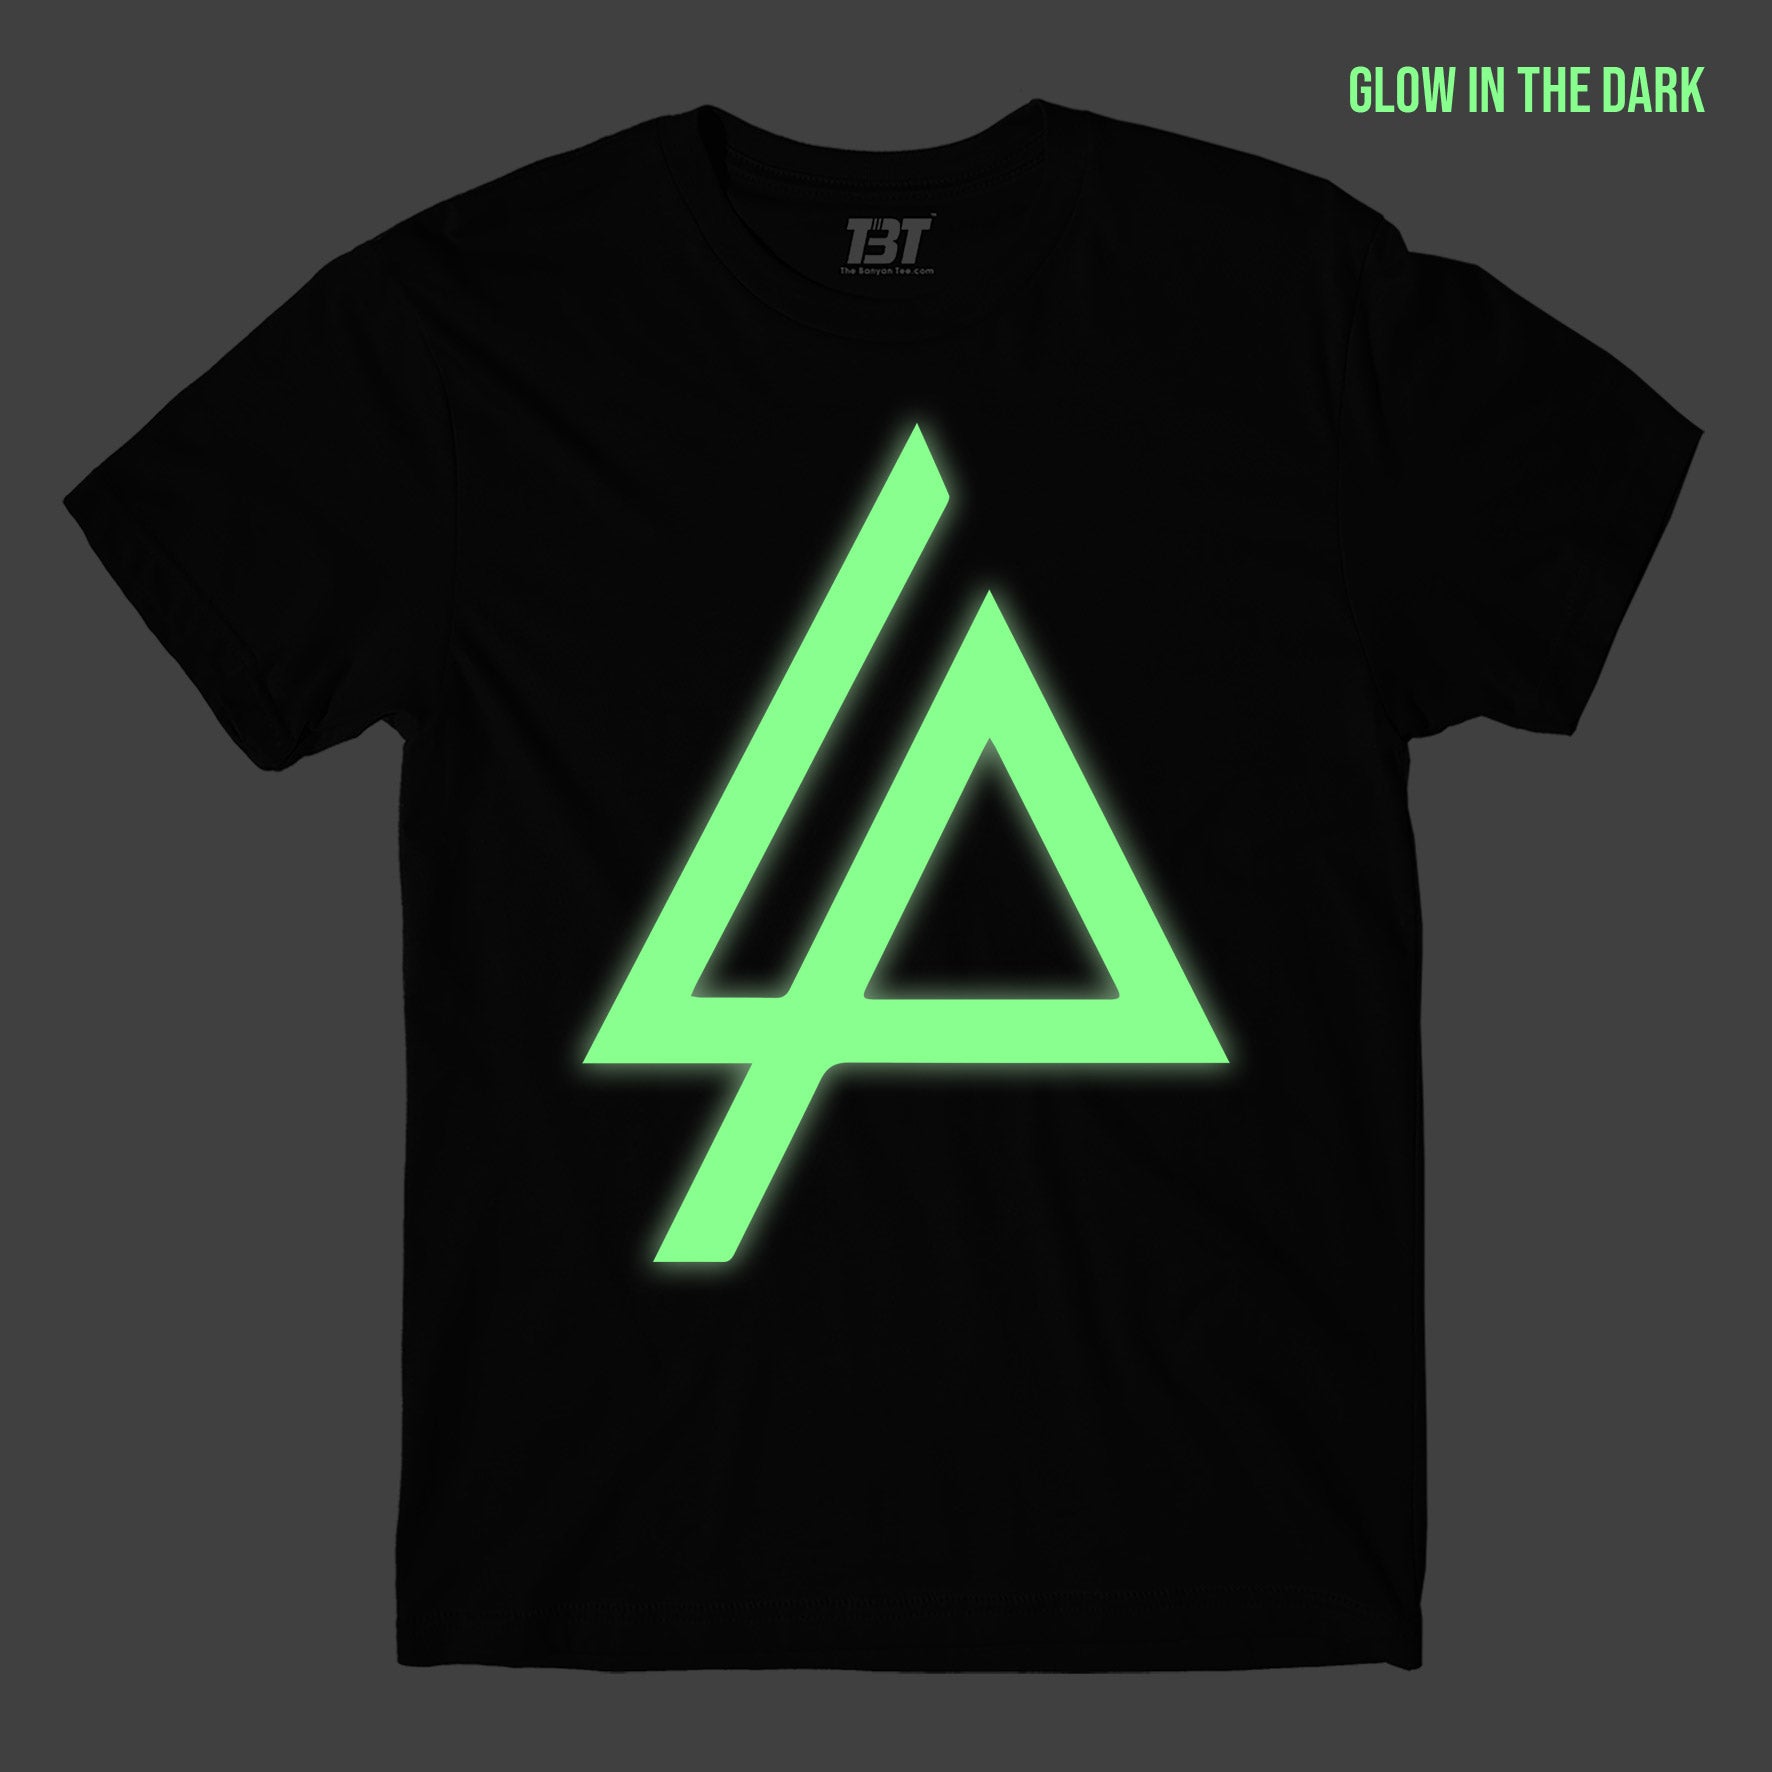 Glow In The Dark Linkin Park T-shirt by The Banyan Tee